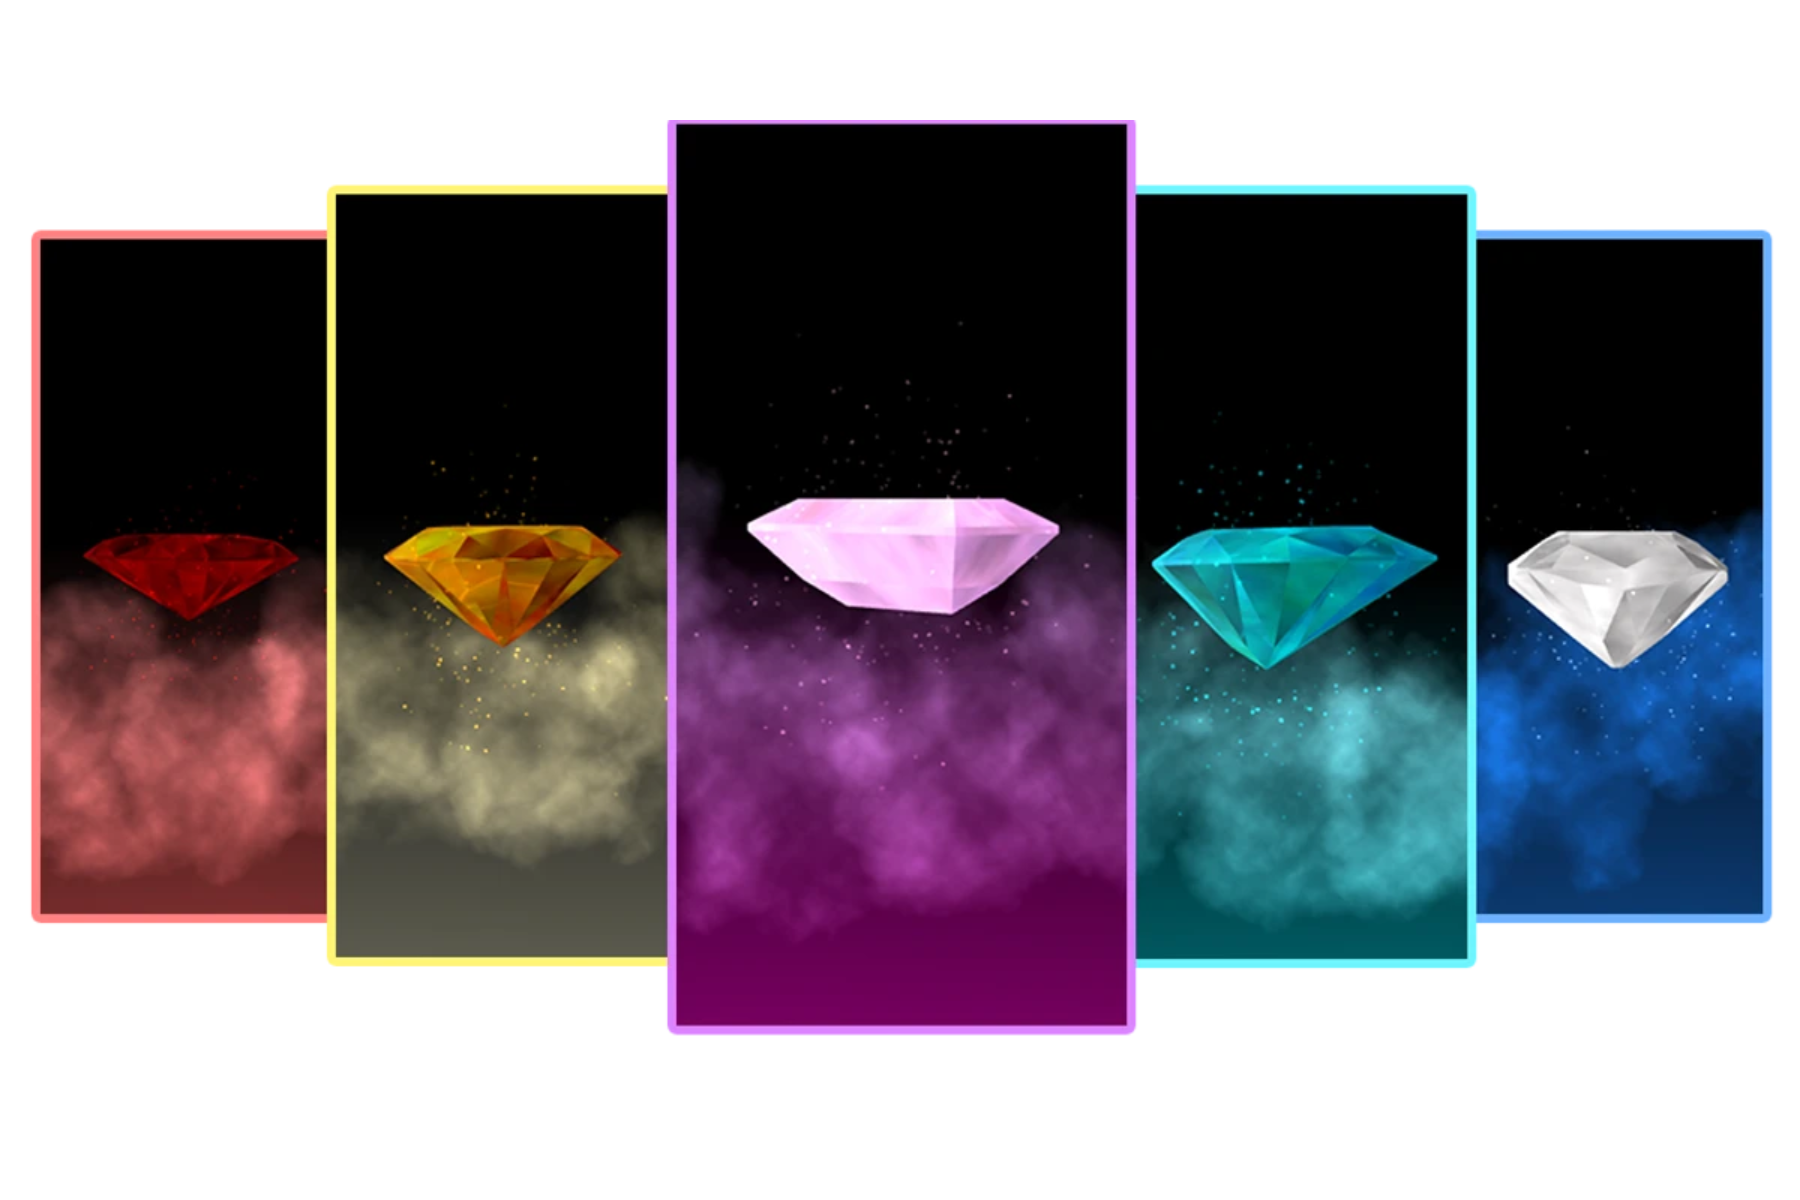 Five gemstones of different colors